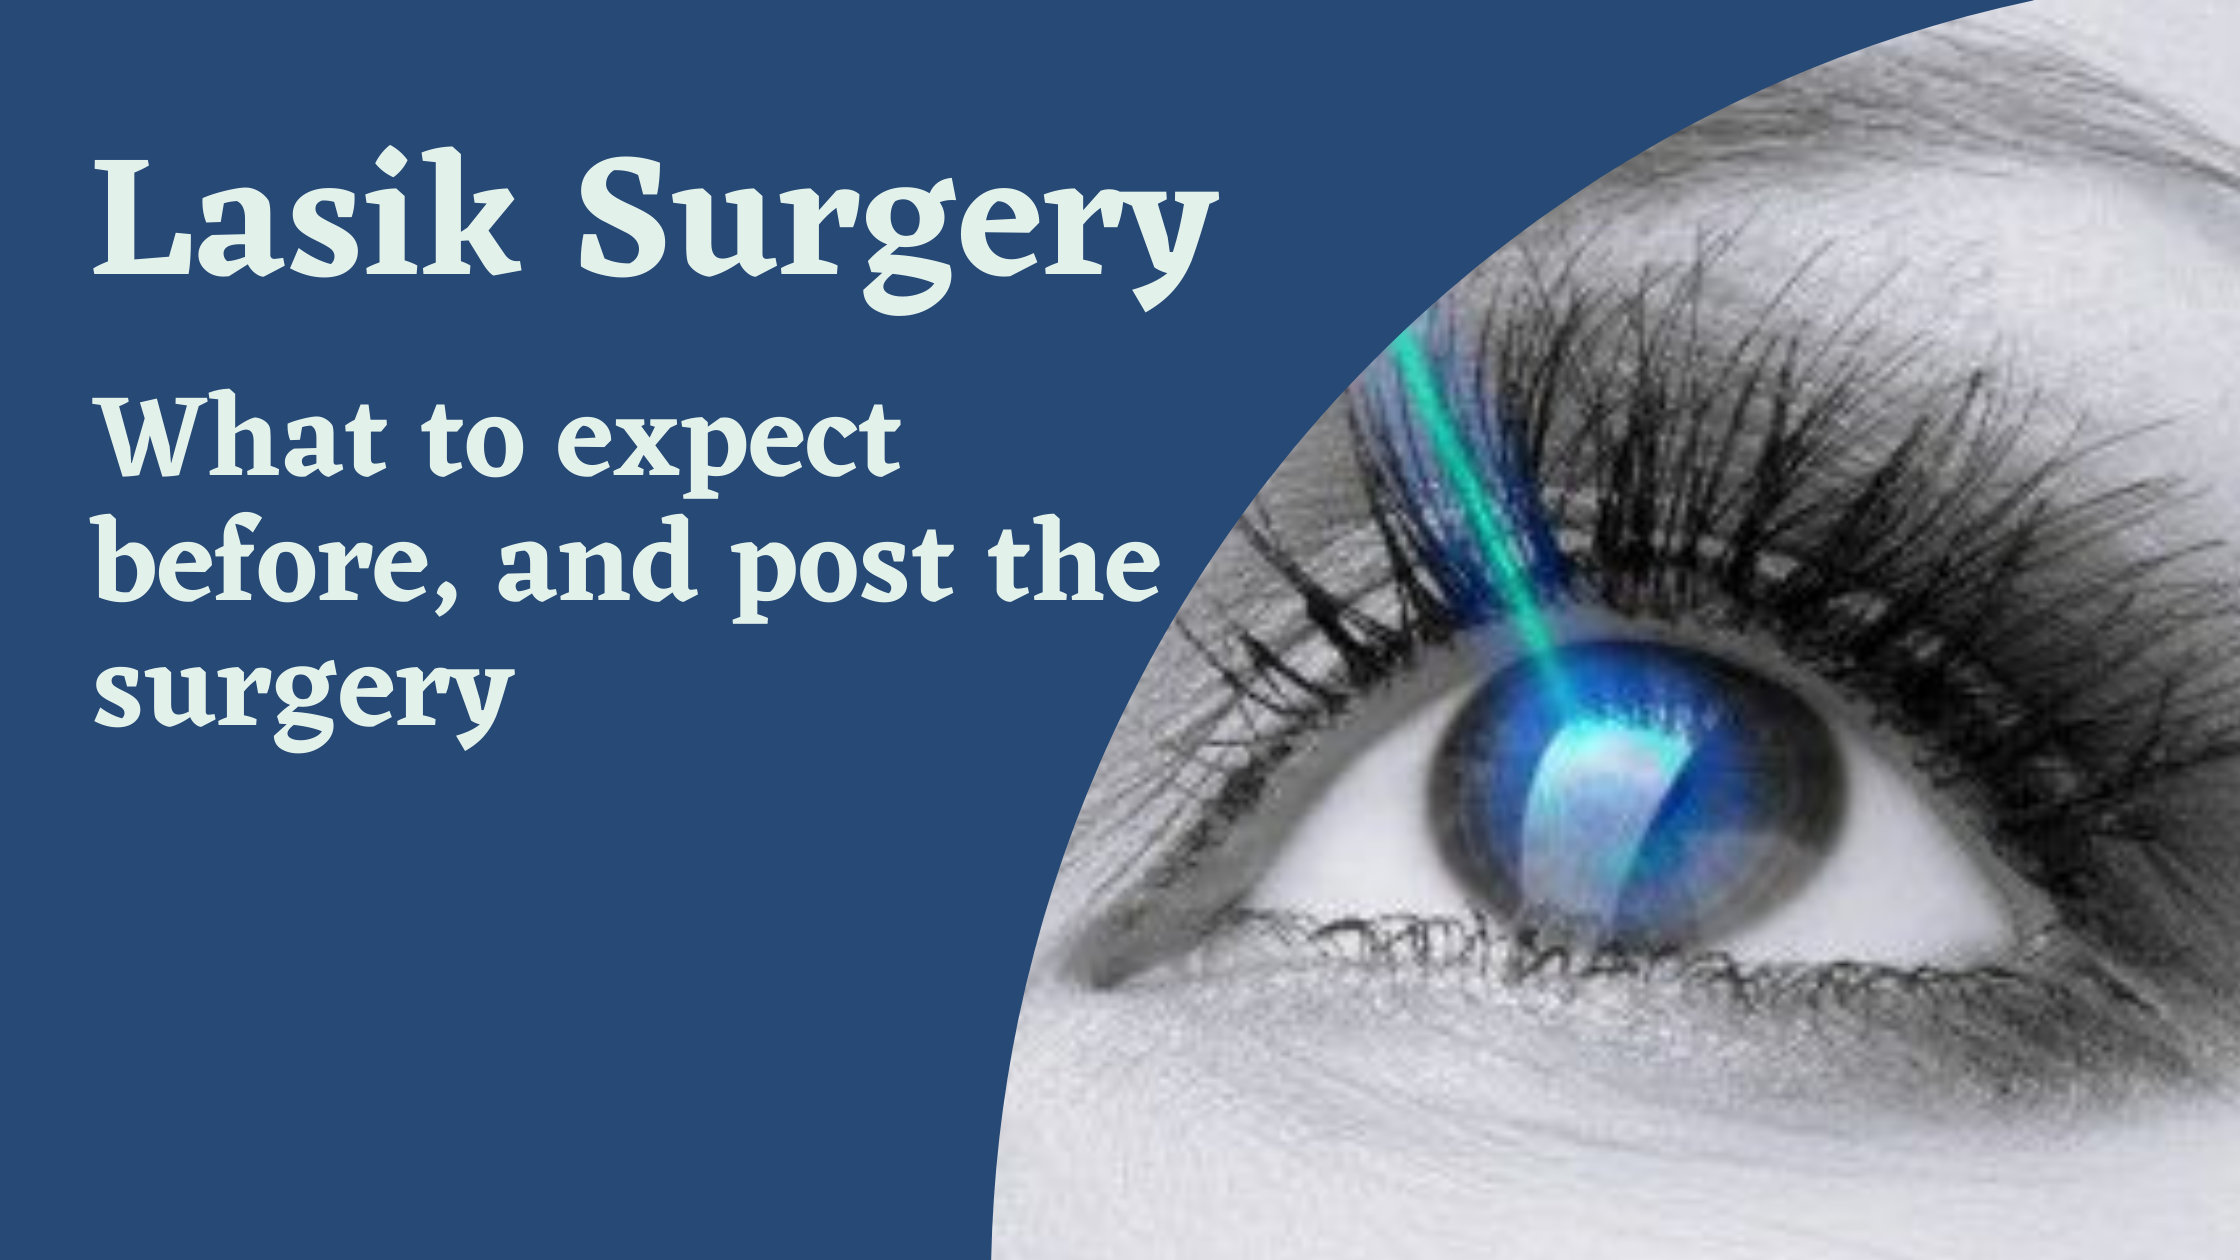 Lasik Surgery: What to expect before, and post the surgery